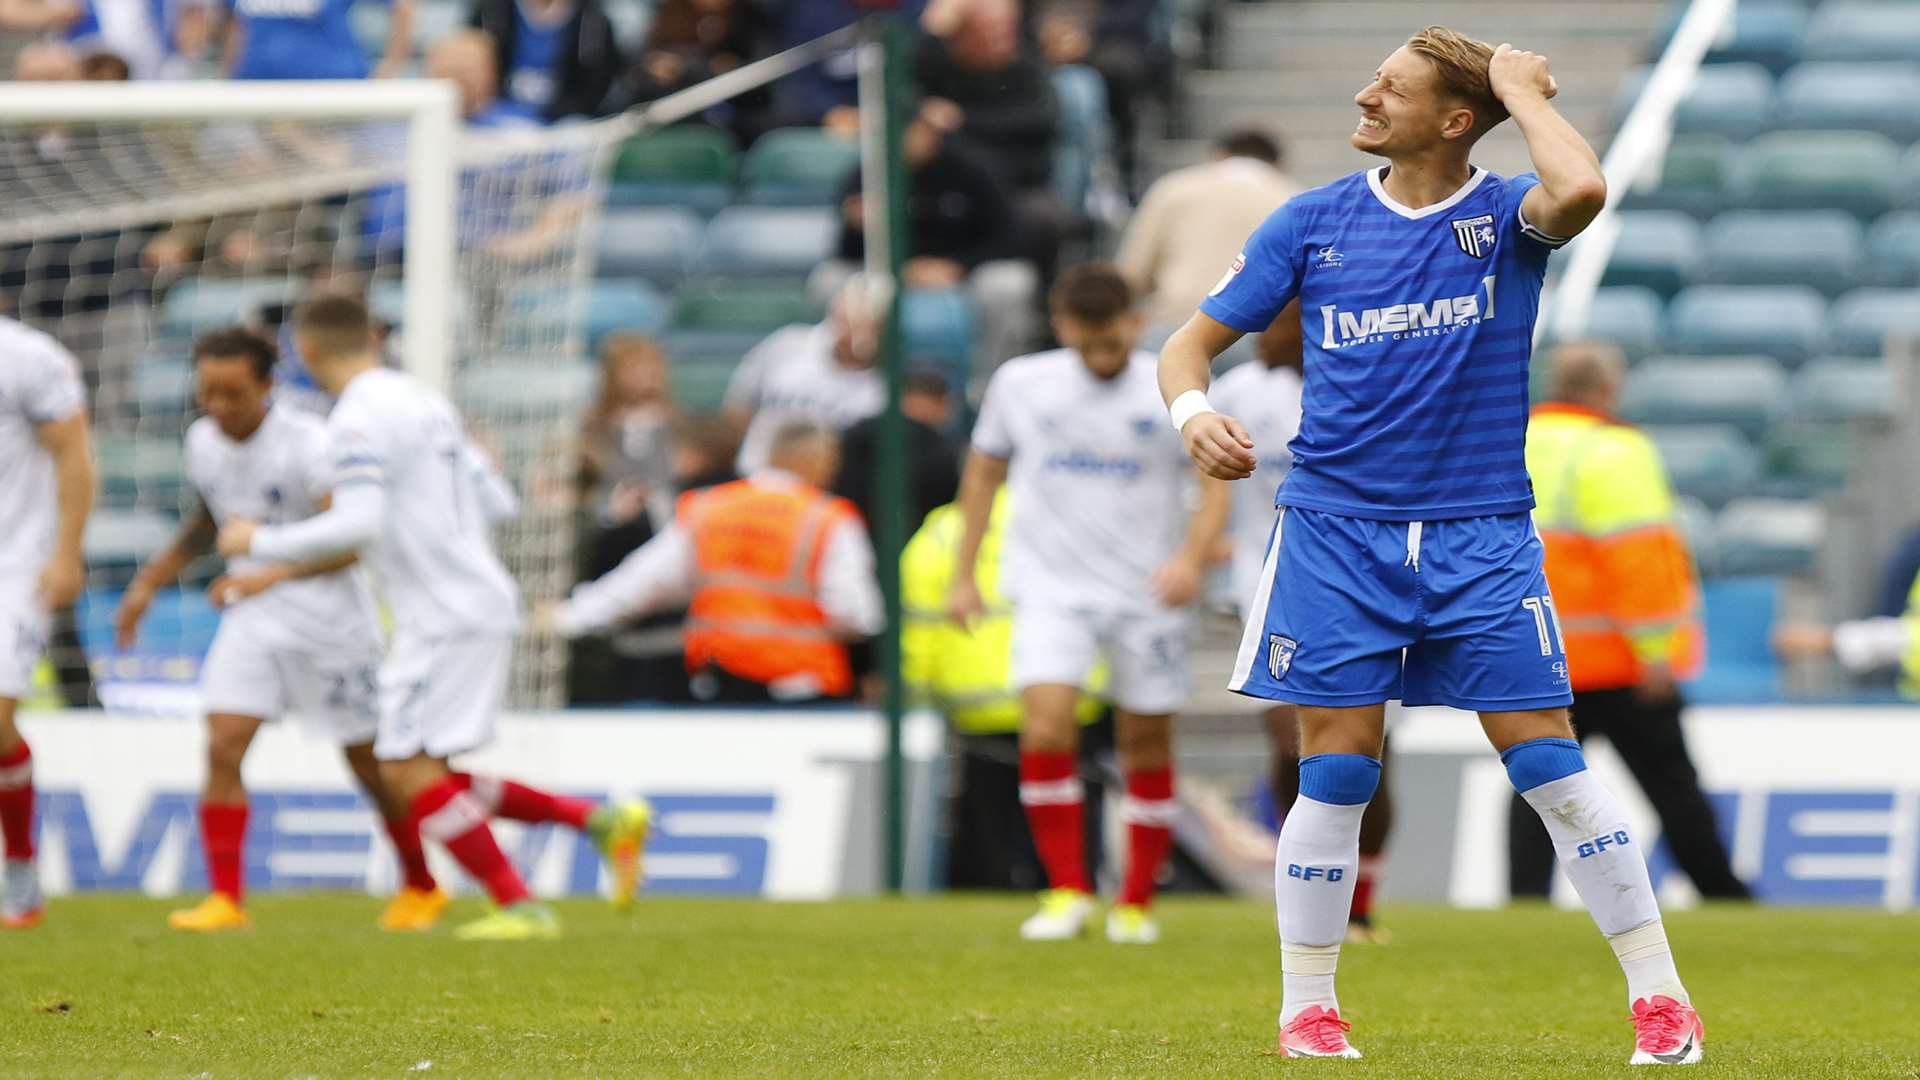 Agony for Lee Martin as Gills fall behind Picture: Andy Jones